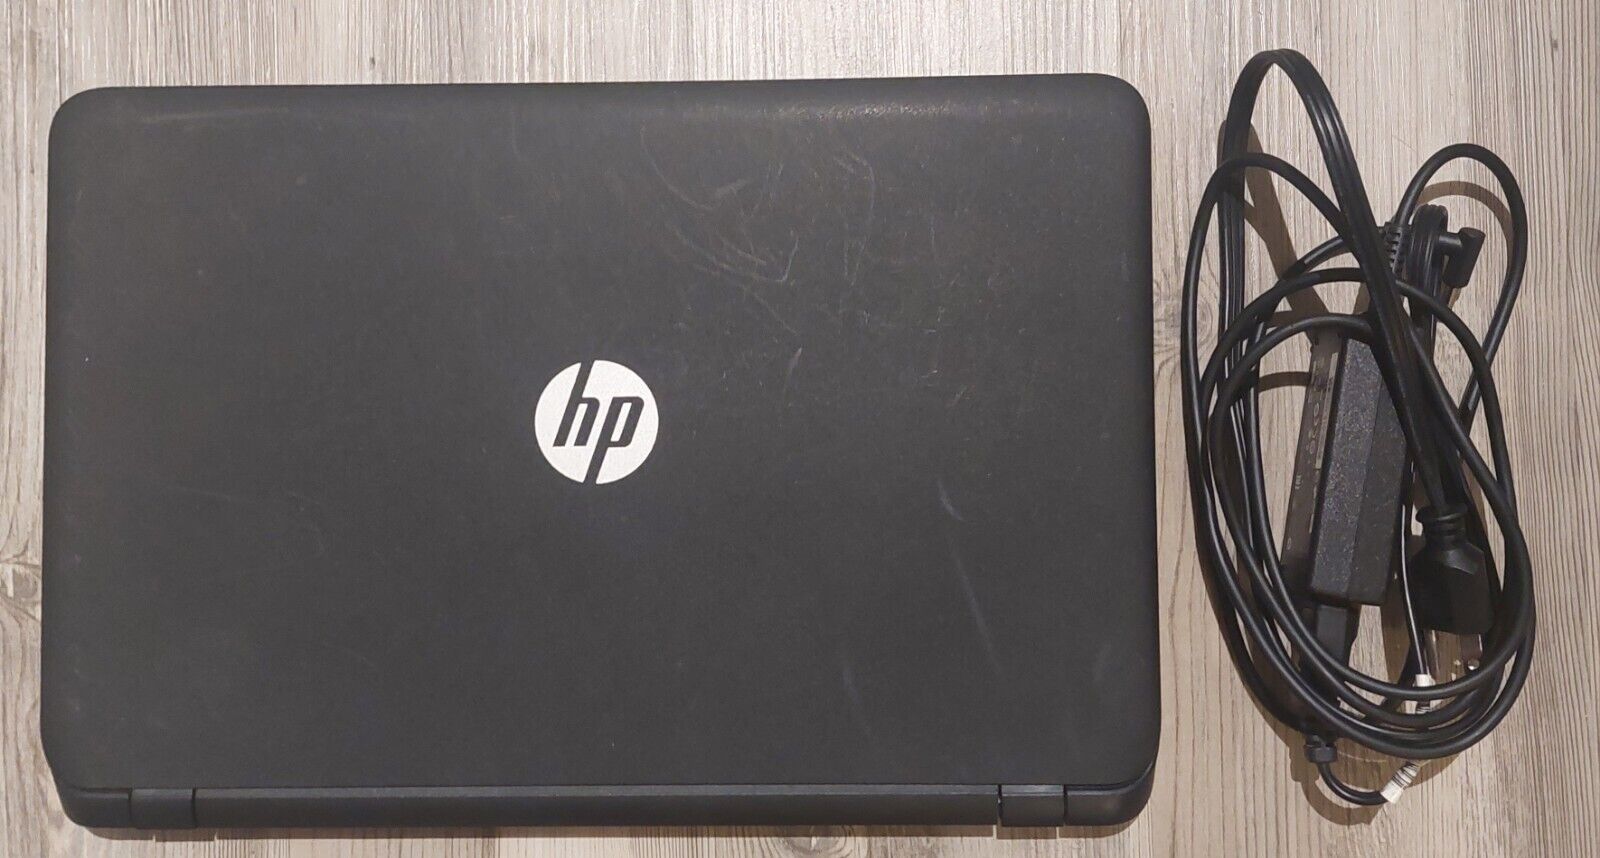 HP Pavilion 15-f287wm 15.6in. (500GB, AMD A8 Quad-Core, 4GB) Not Tested Turns On